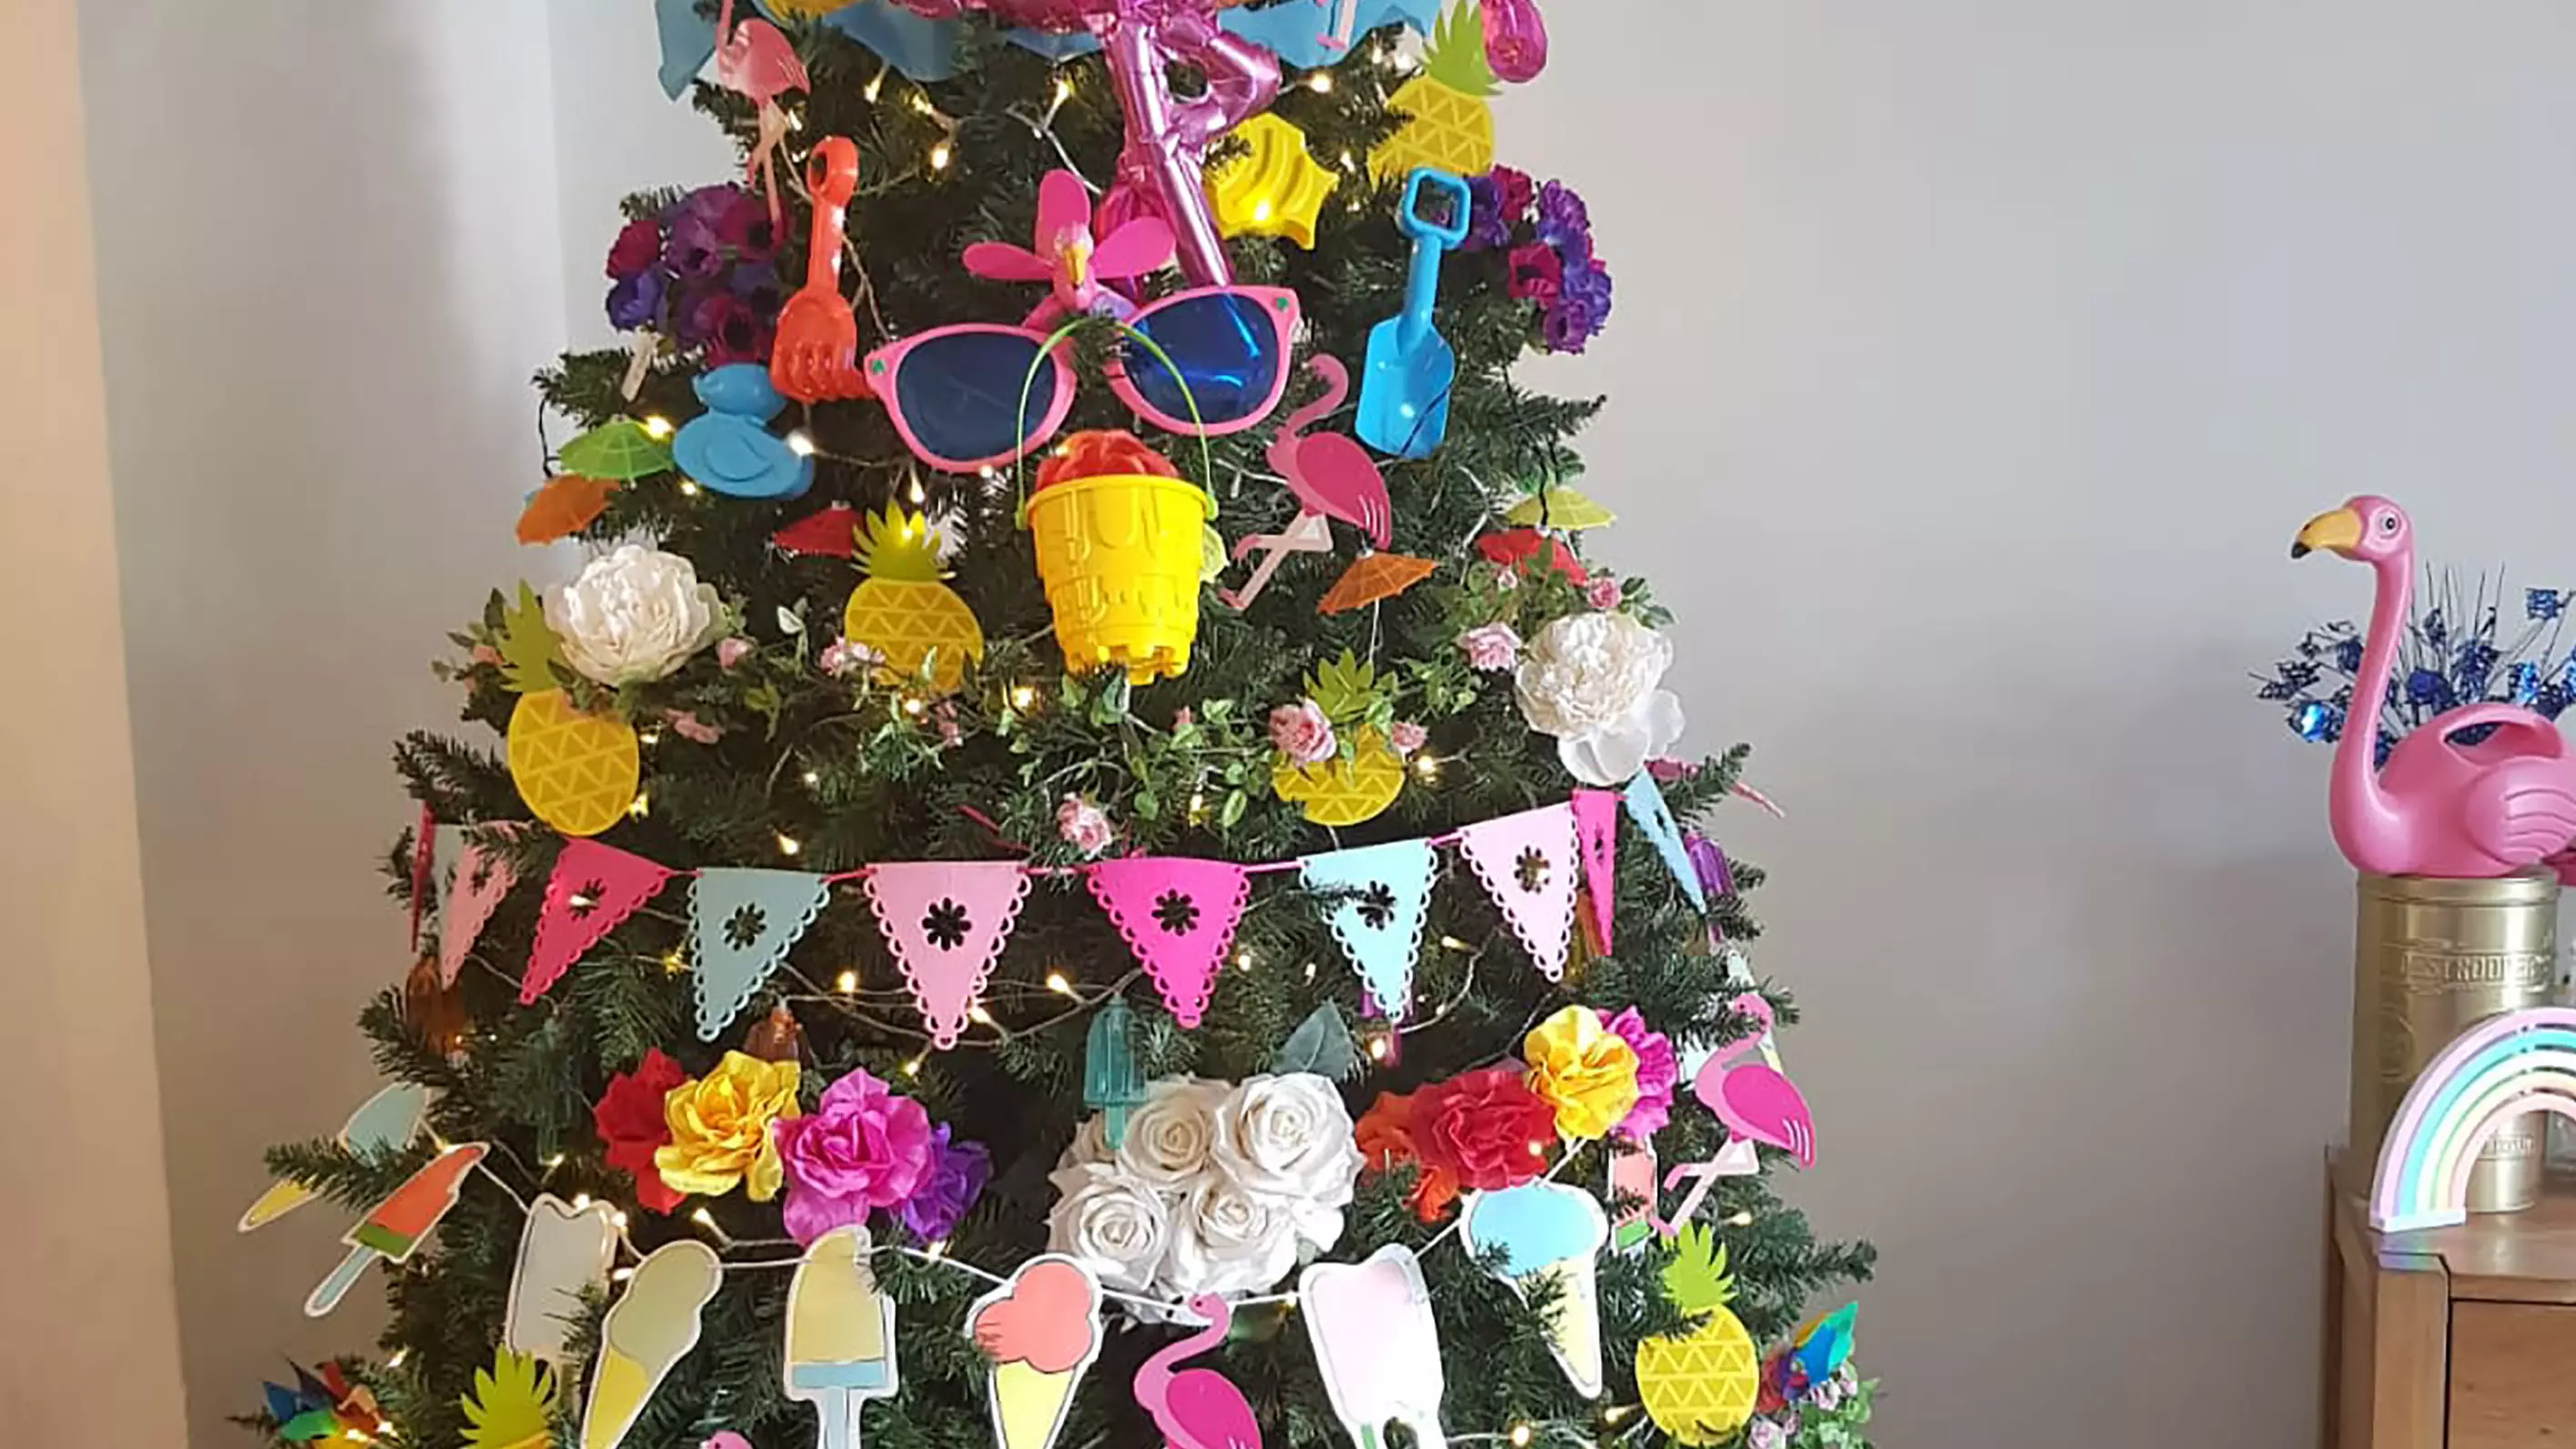 Woman Creates 'Christmas' Trees For Every Occasion